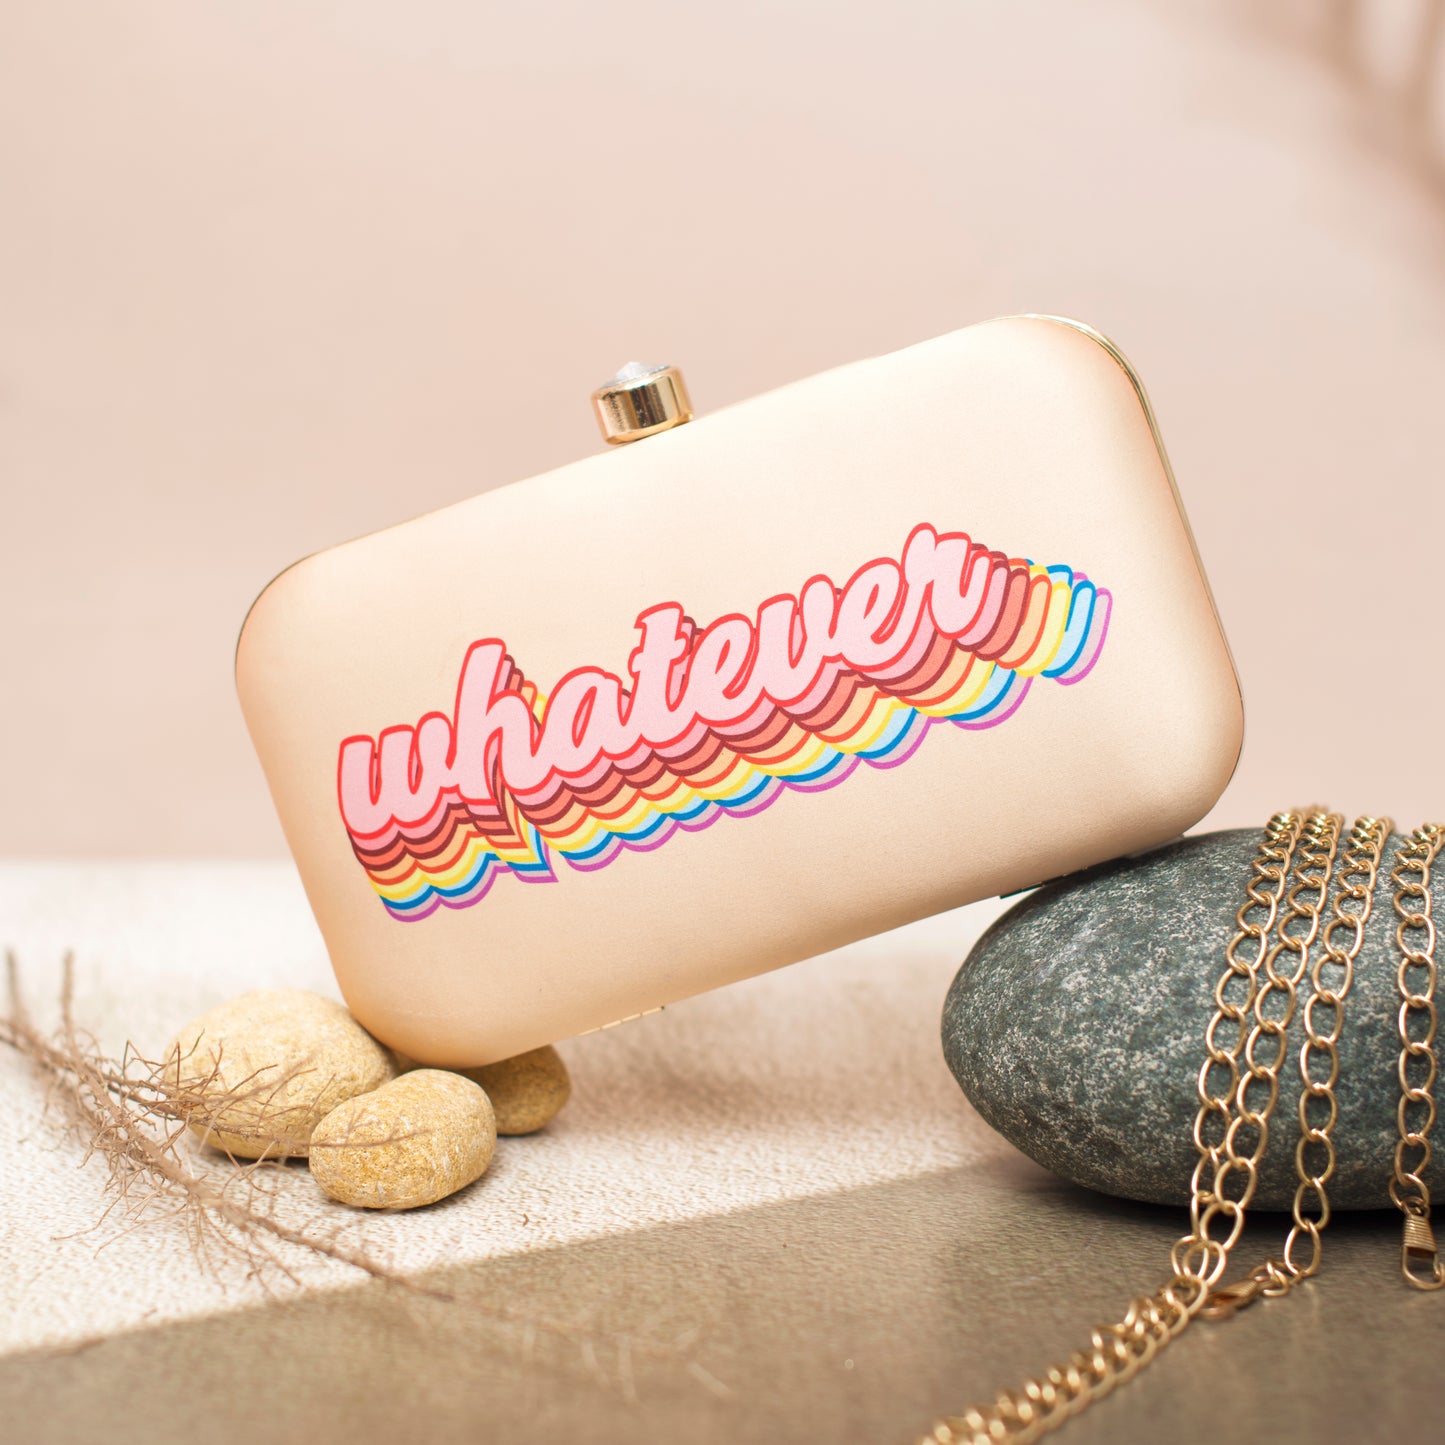 Whatever Theme Printed Clutch